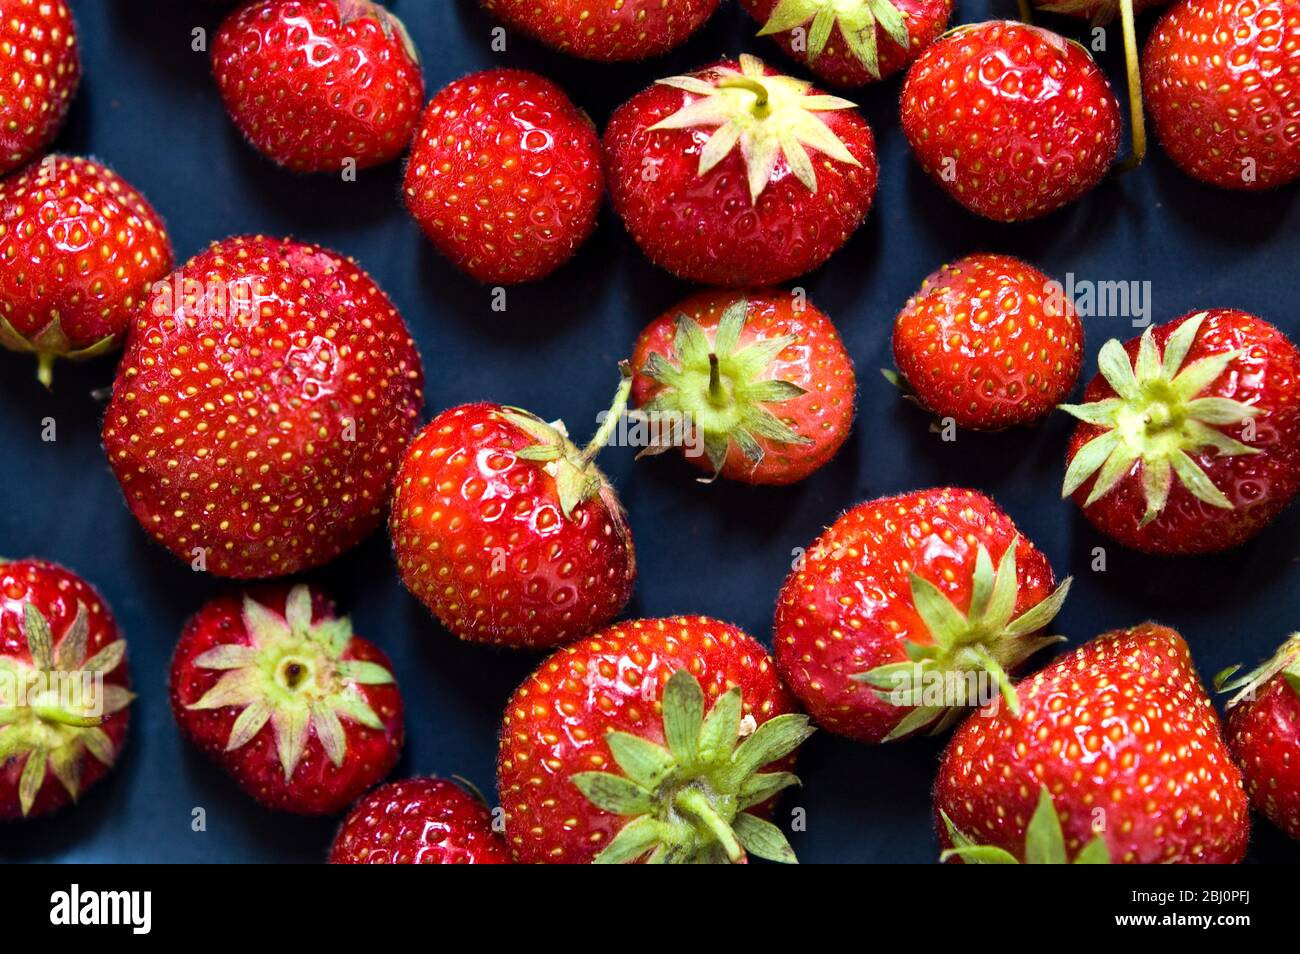 Black plate with red strawberries - Stock Photo